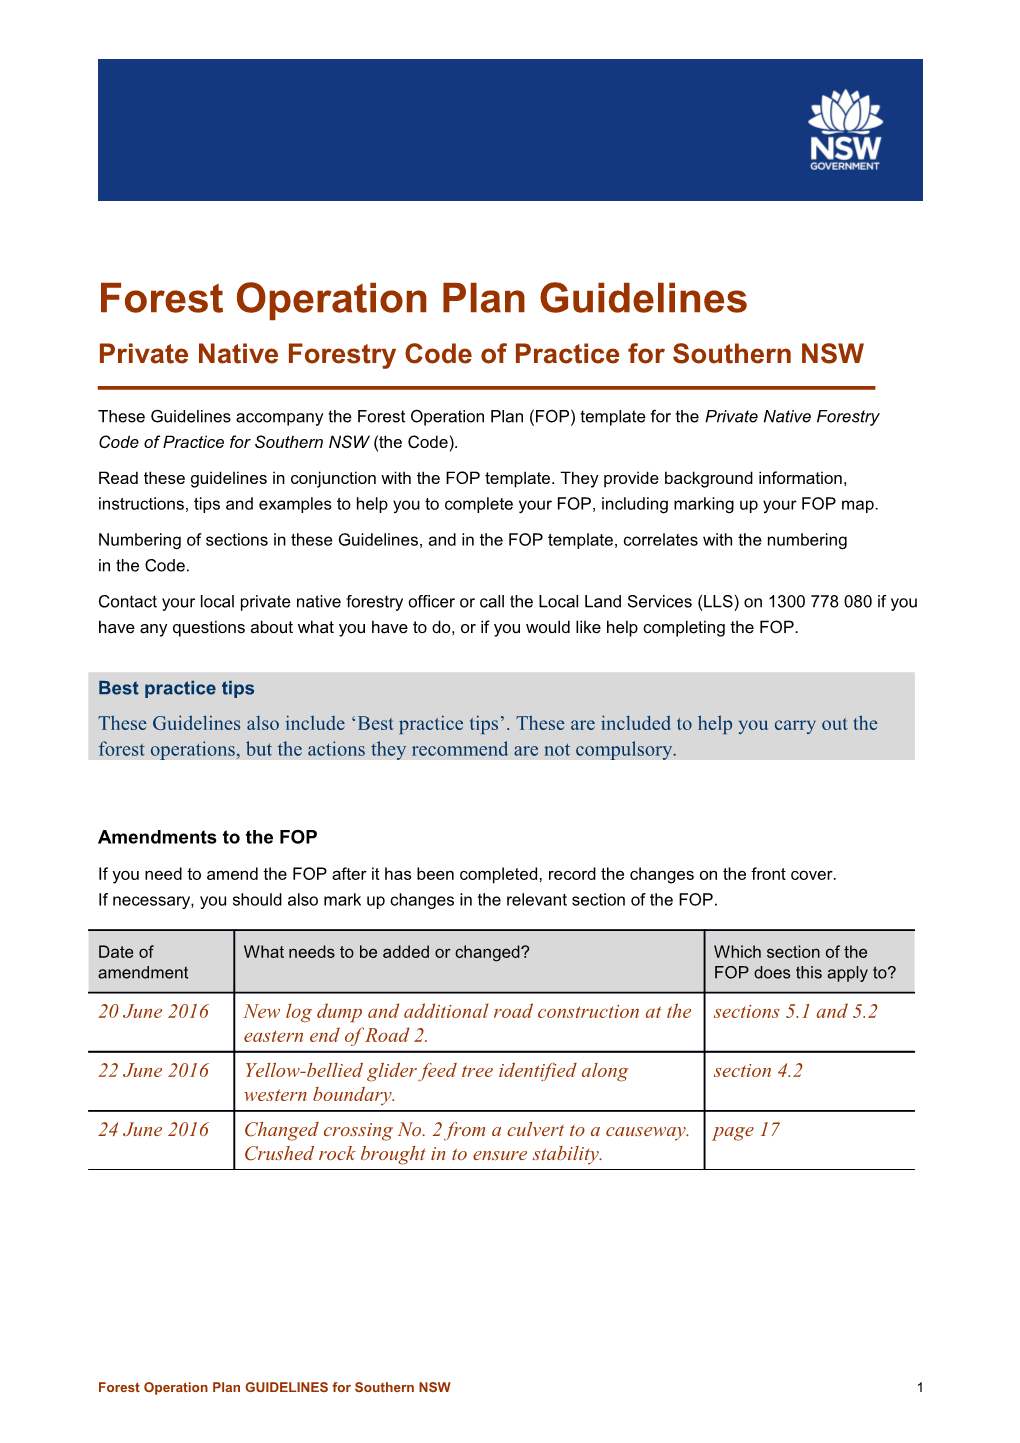 Forest Operation Plan Guidelines for Southern NSW